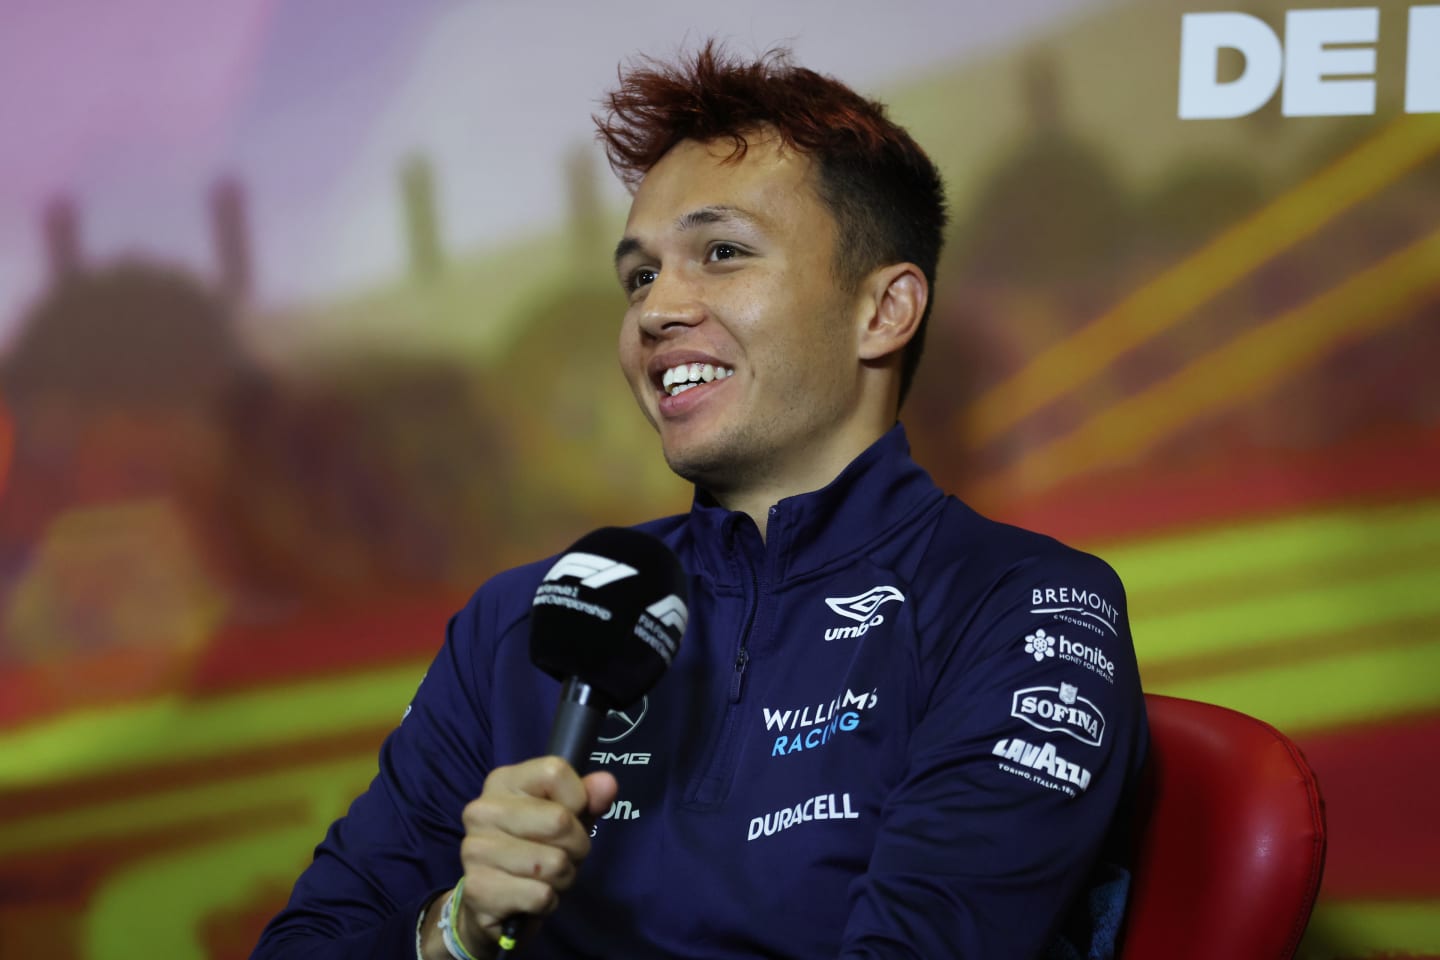 BARCELONA, SPAIN - MAY 20: Alexander Albon of Thailand and Williams talks in the Drivers Press Conference prior to practice ahead of the F1 Grand Prix of Spain at Circuit de Barcelona-Catalunya on May 20, 2022 in Barcelona, Spain. (Photo by Bryn Lennon/Getty Images)